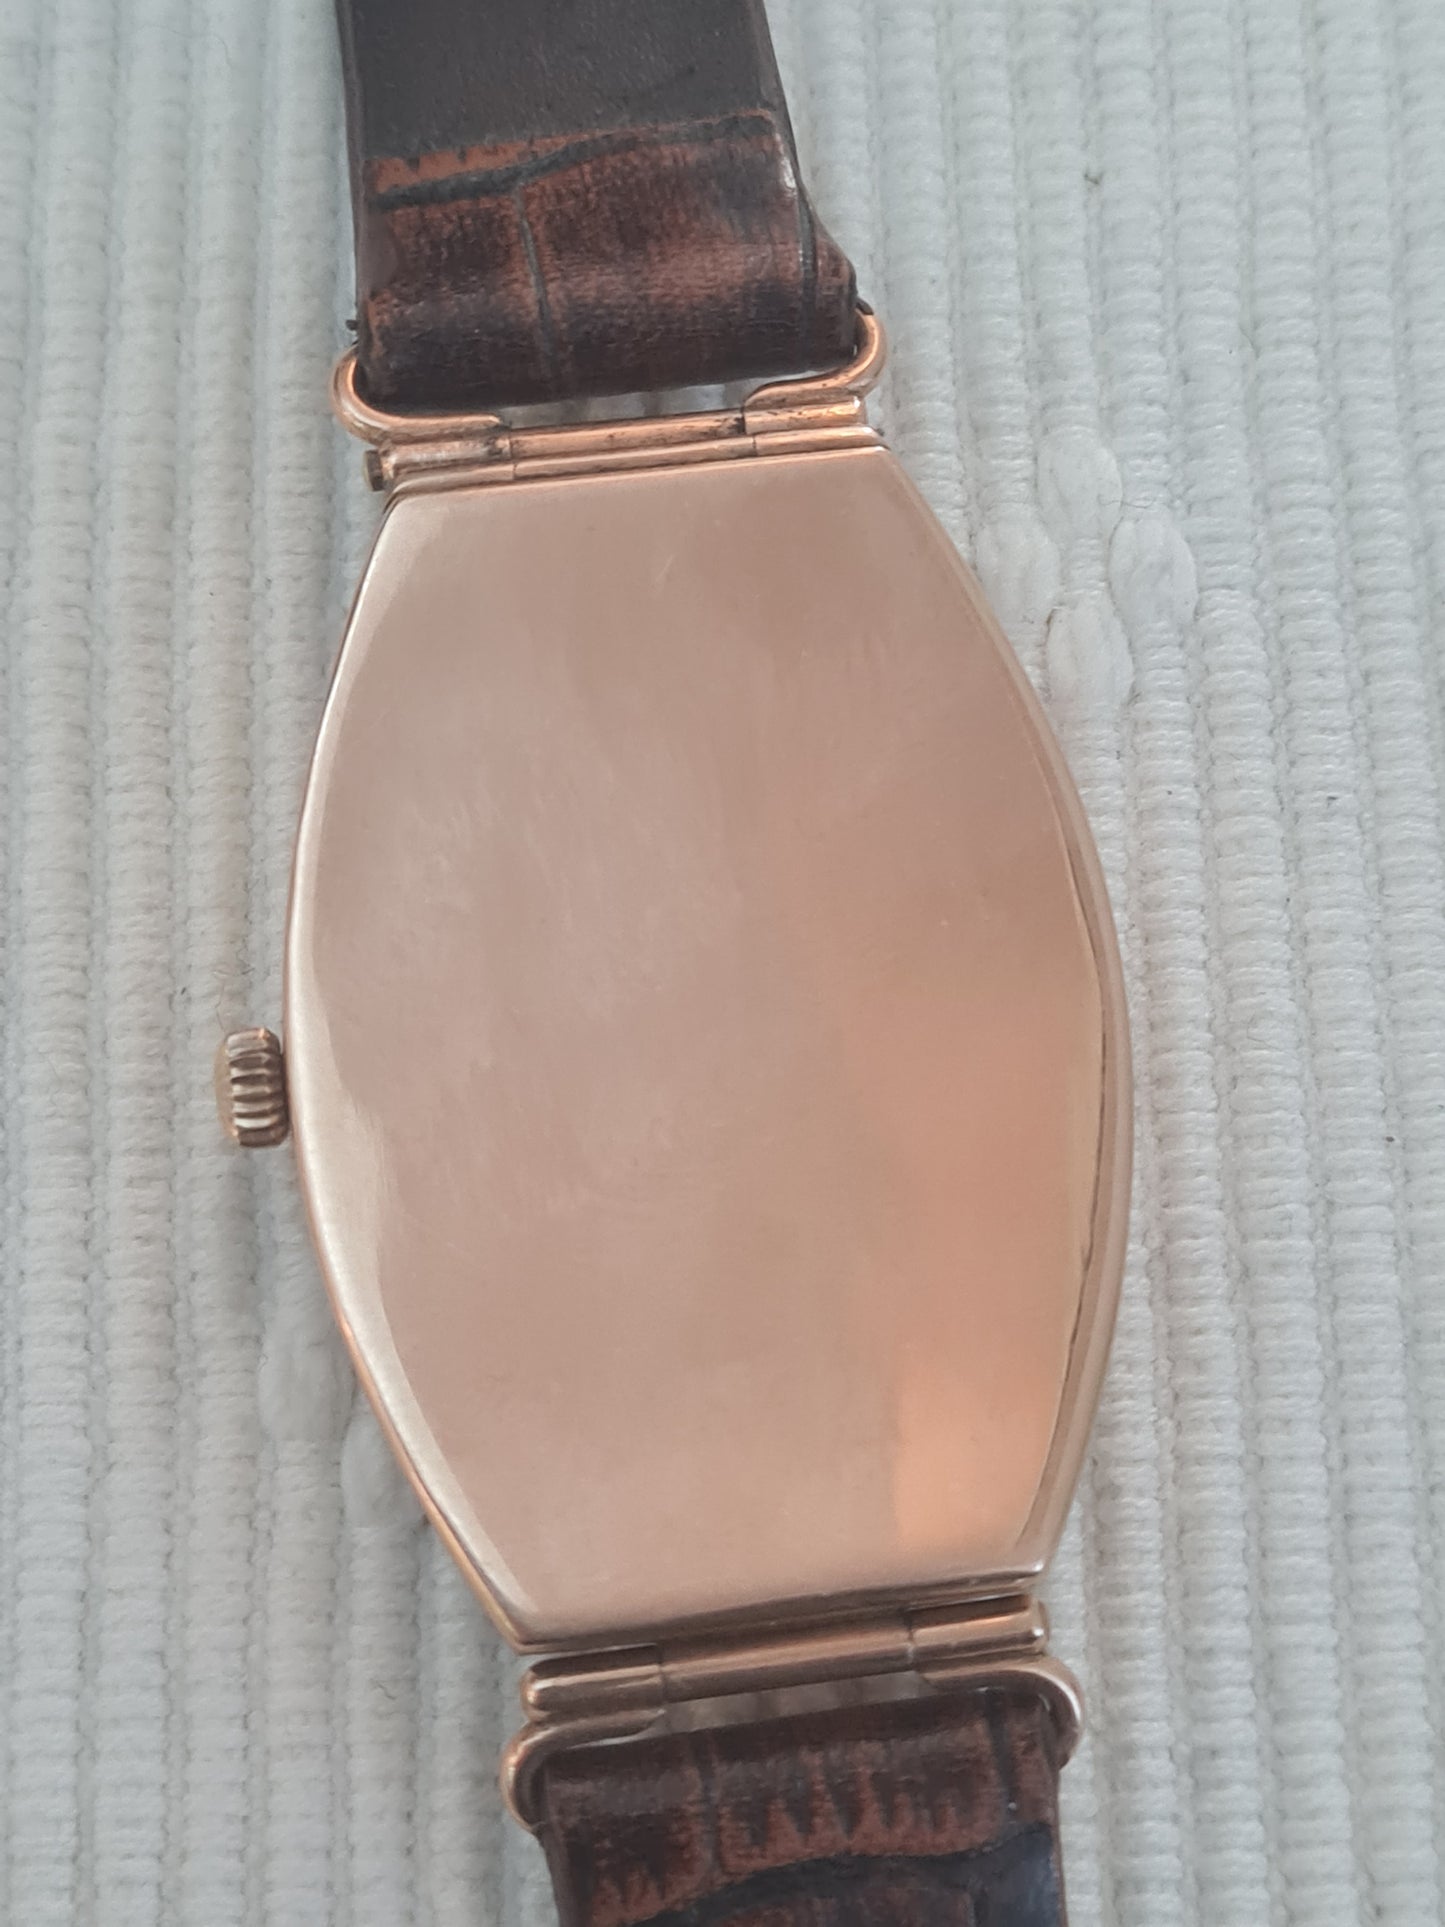 Omega Tonneau-Curved Solid Gold ( 14K ) Wrist Watch !!!!